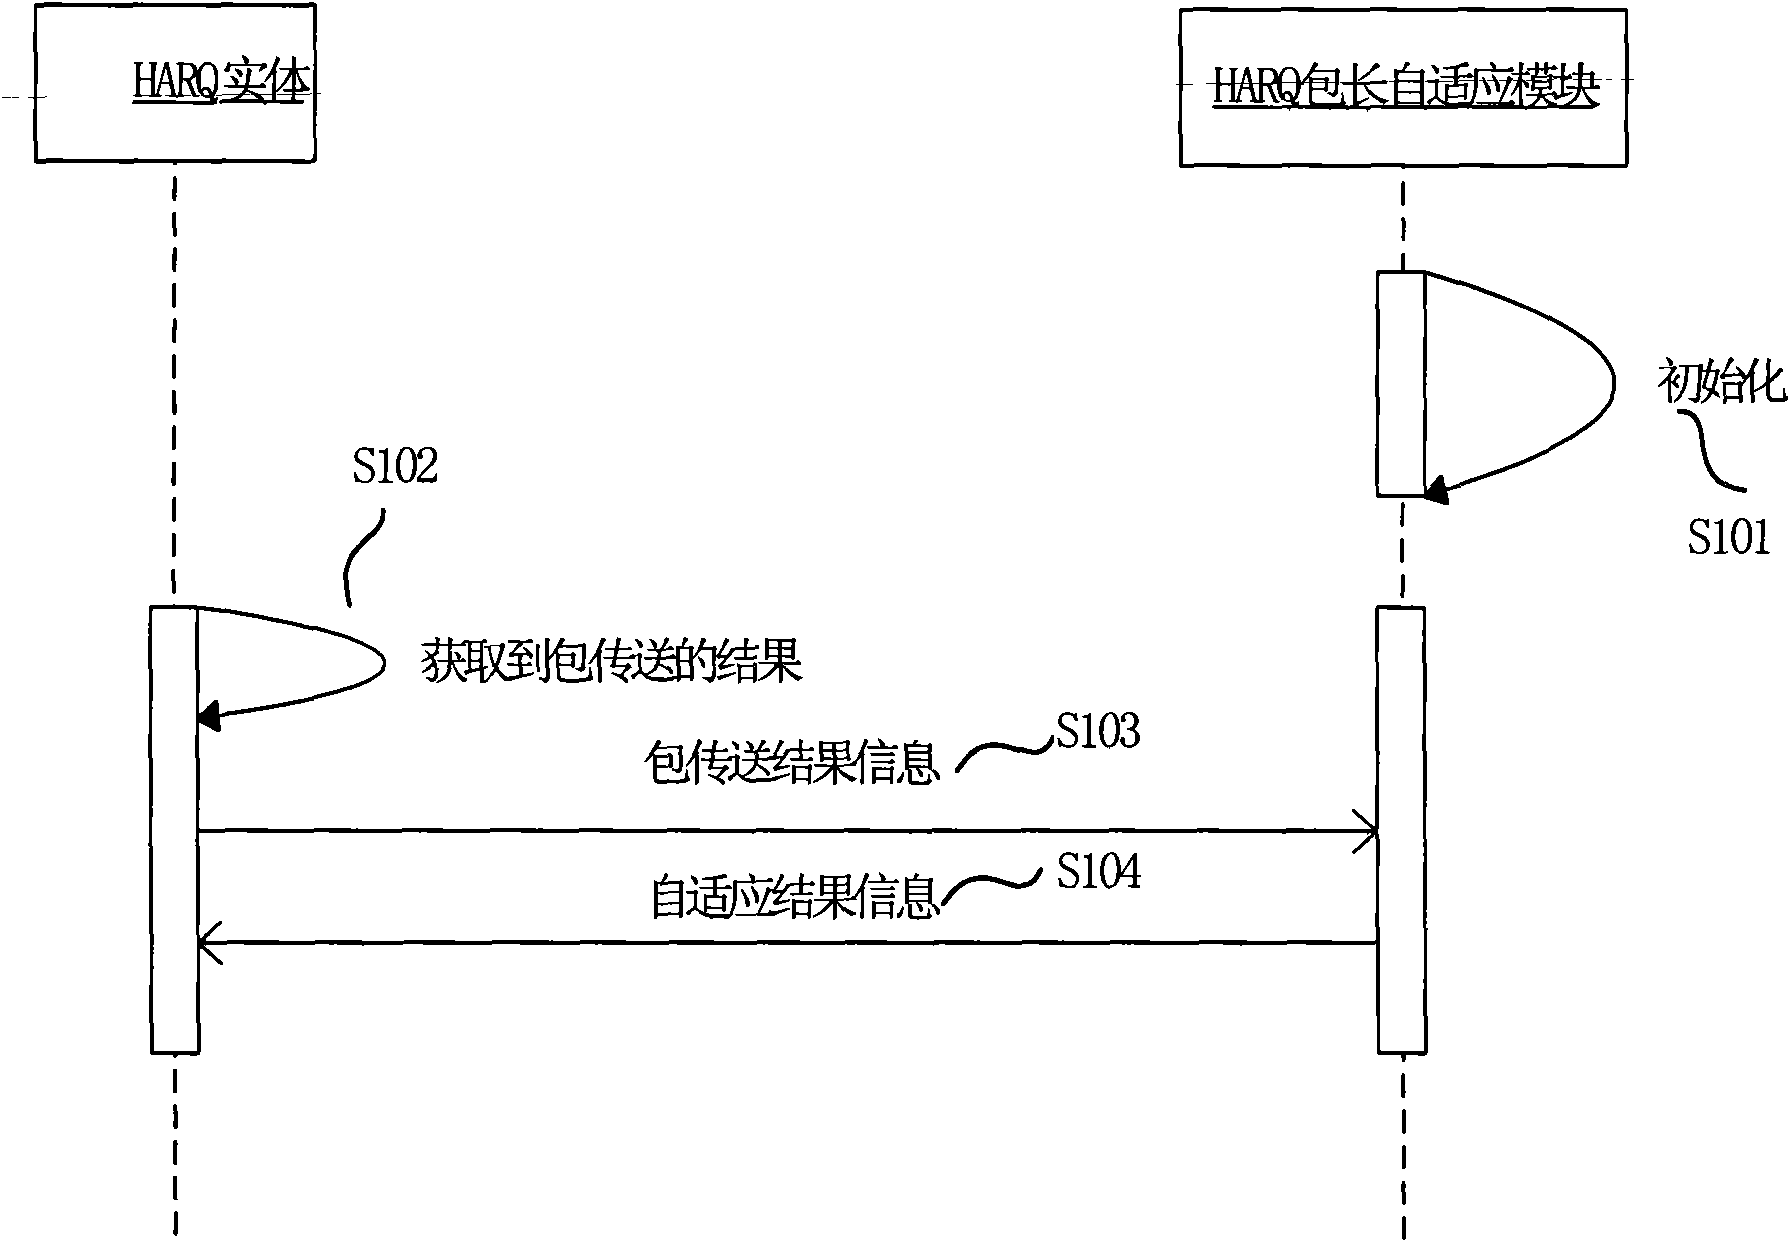 Packet length adaptive method for HARQ packet in wireless system, and transmission system